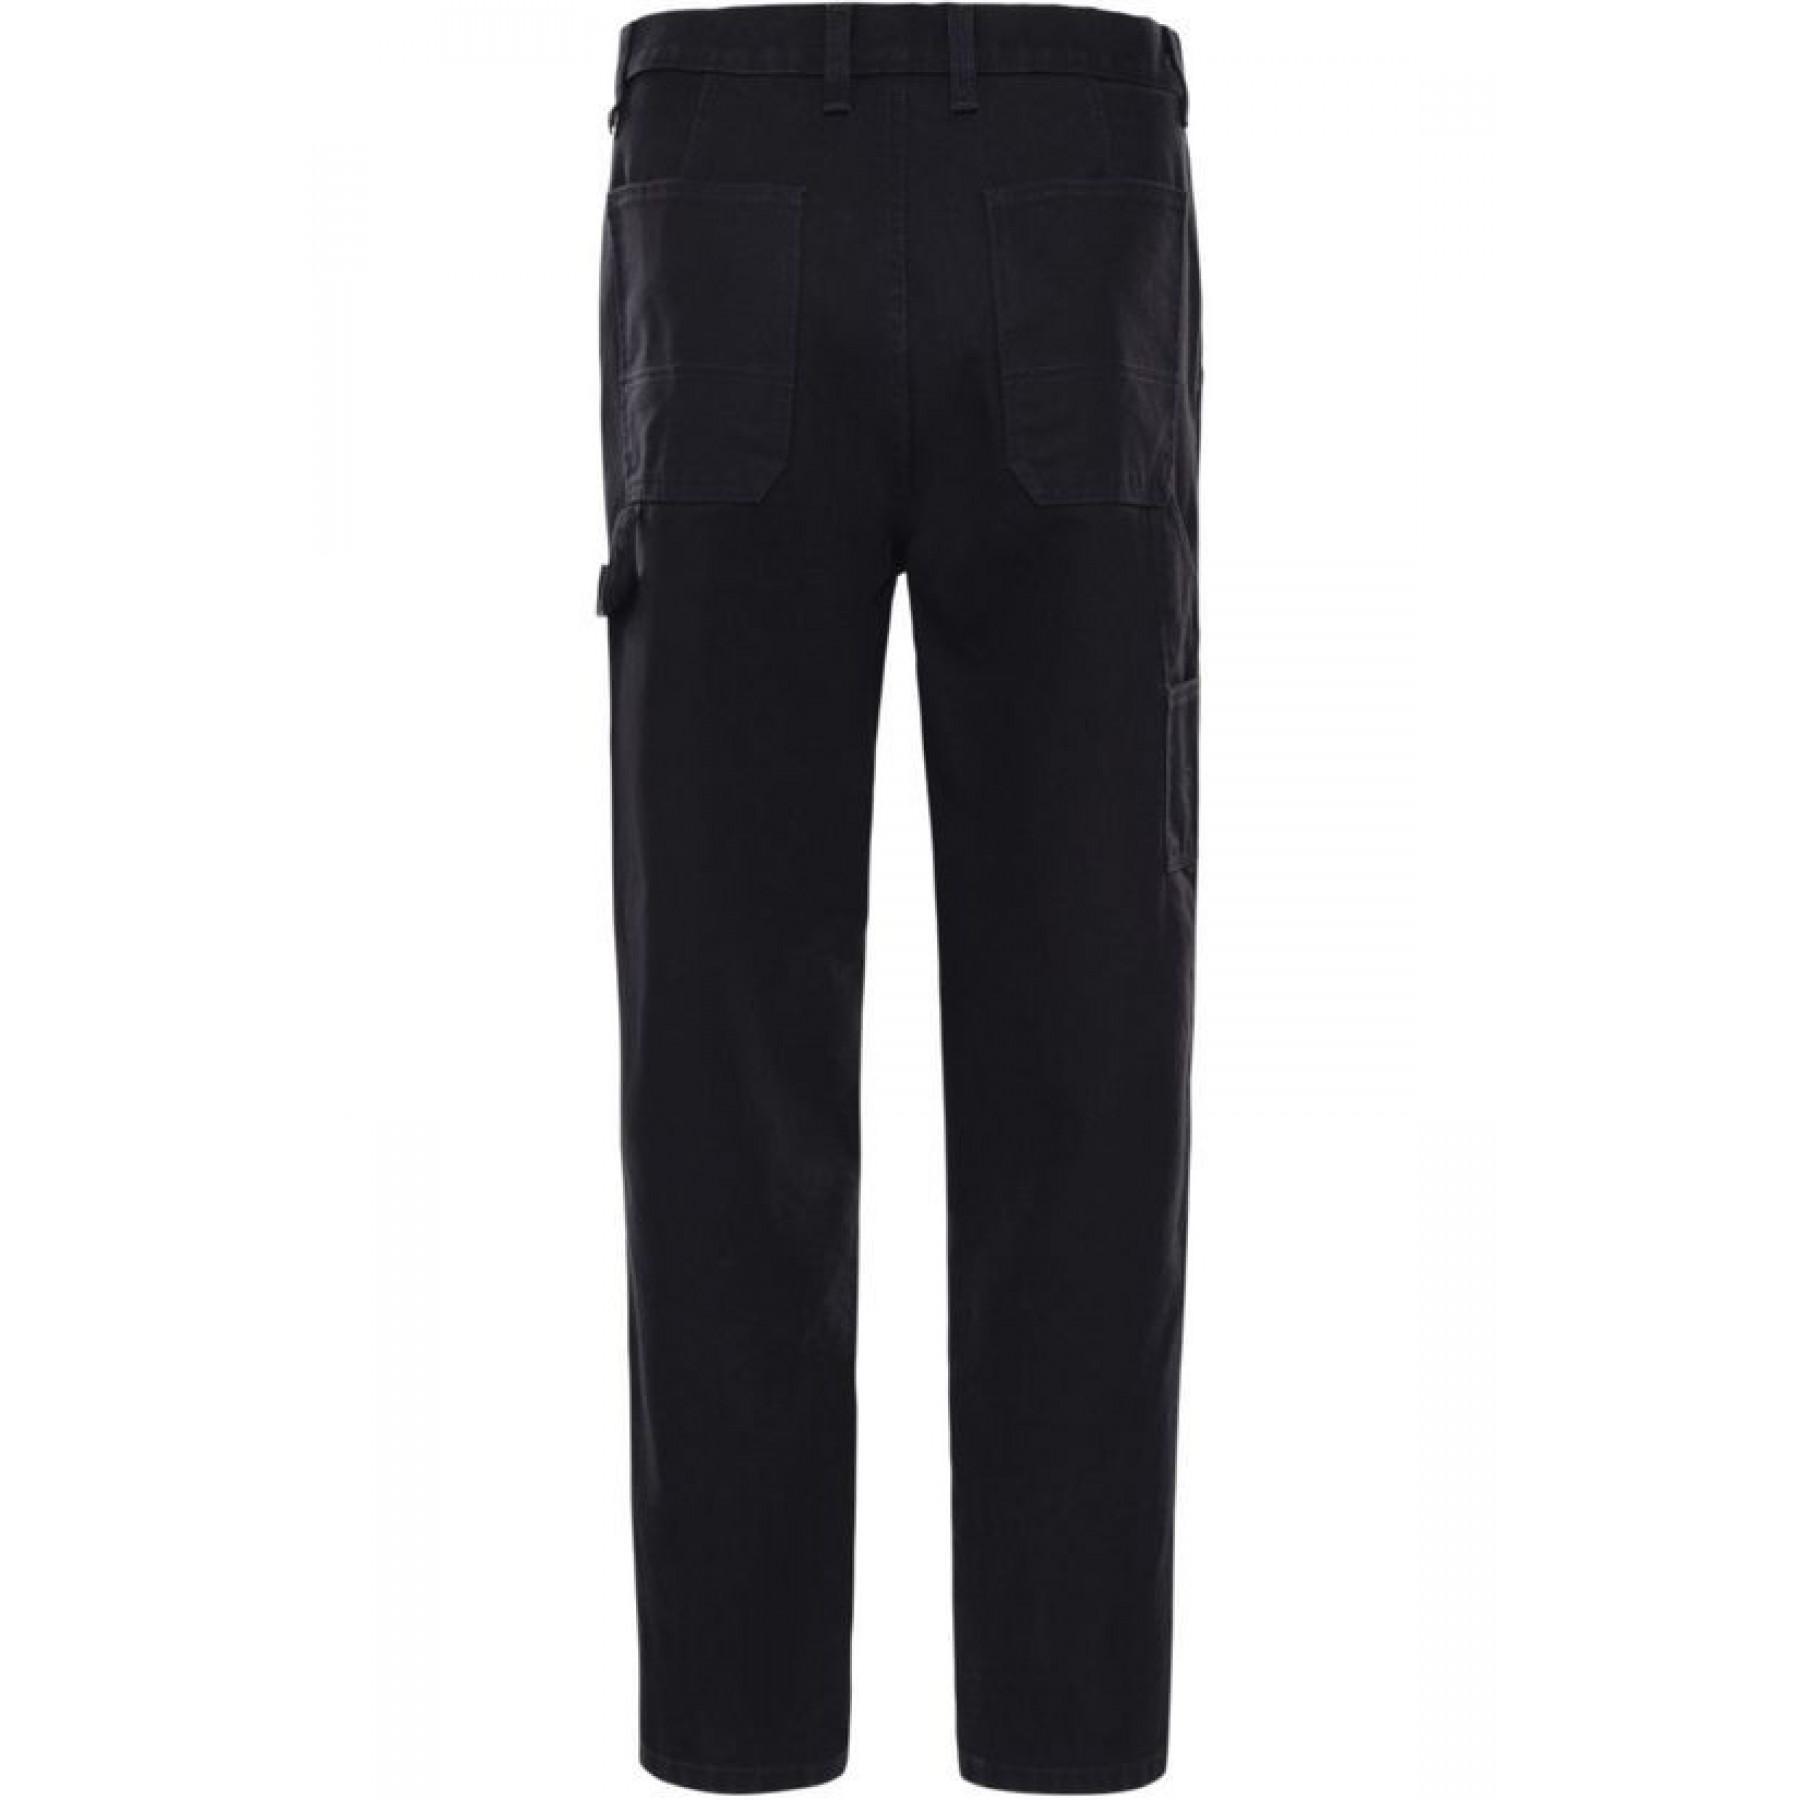 Pants The North Face Berkeley Canvas